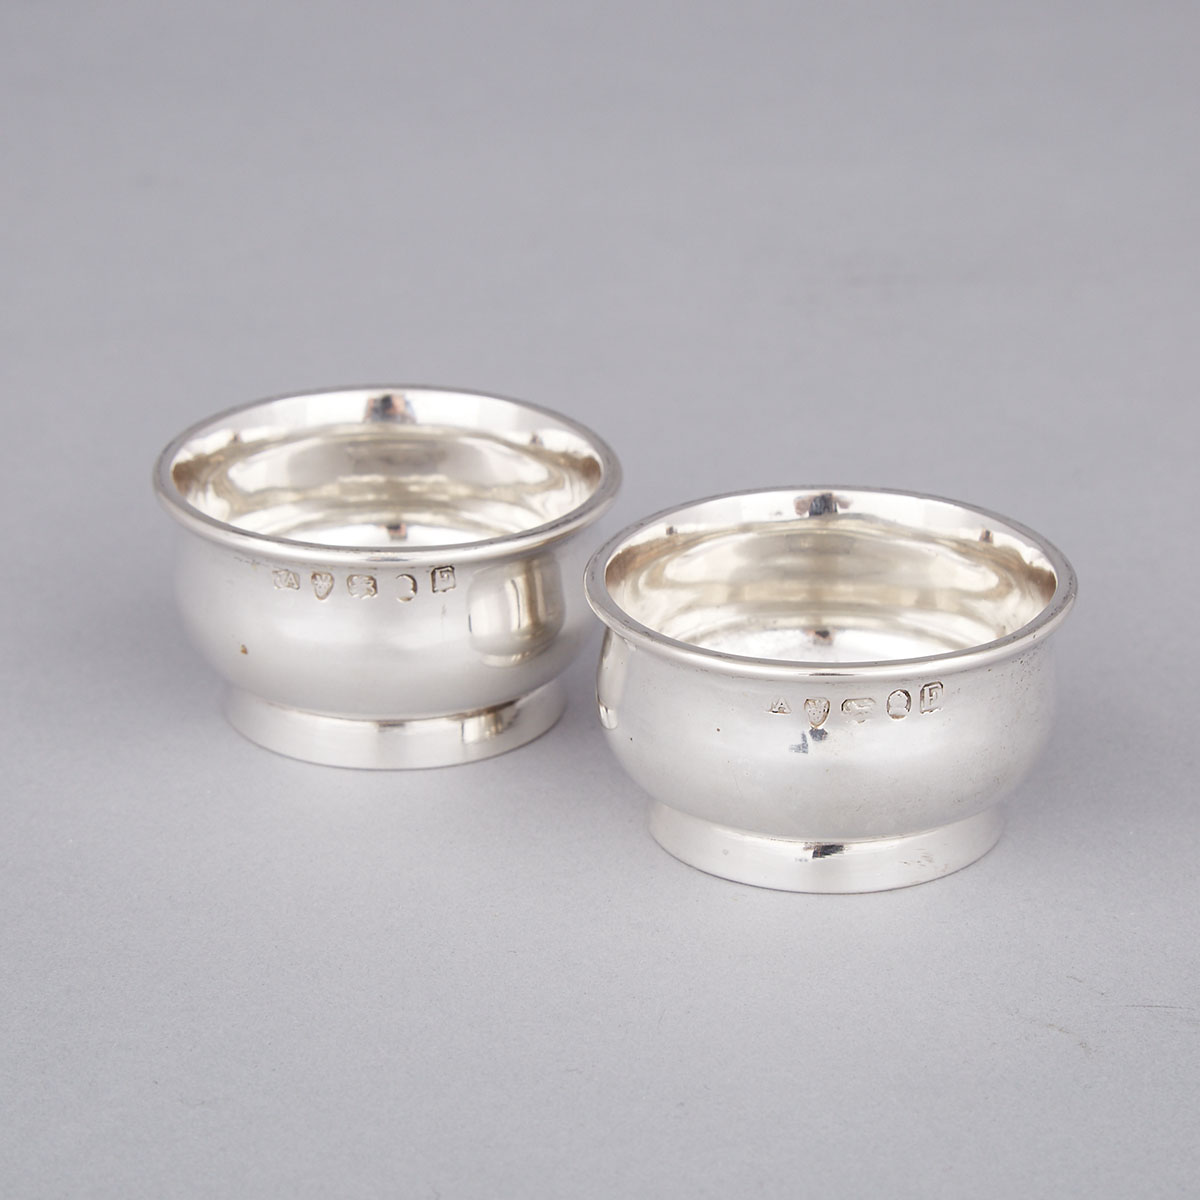 Pair of Colonial Silver Salt Cellars, possibly Chinese Export, 19th century